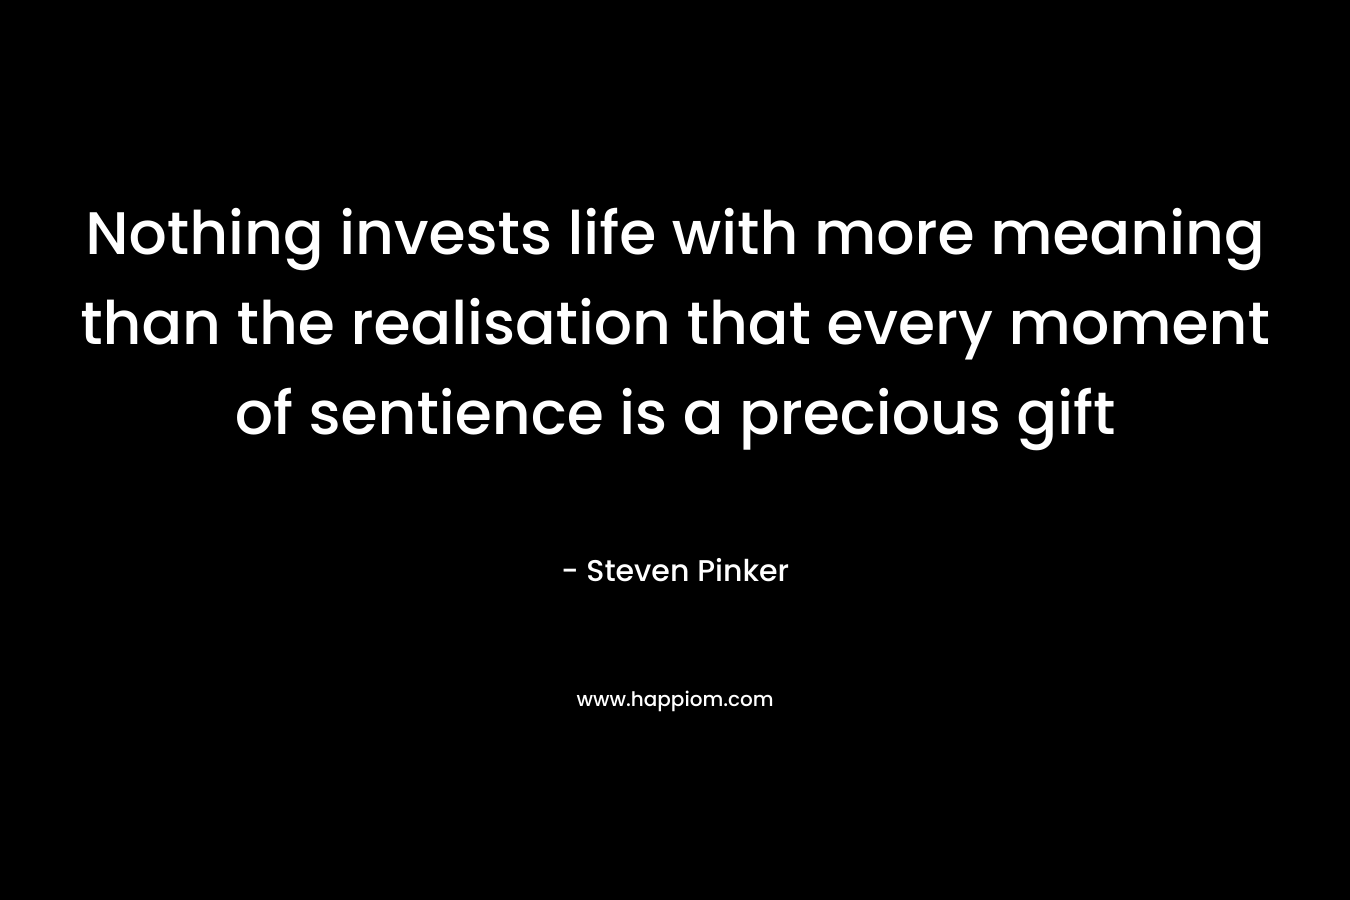 Nothing invests life with more meaning than the realisation that every moment of sentience is a precious gift – Steven Pinker